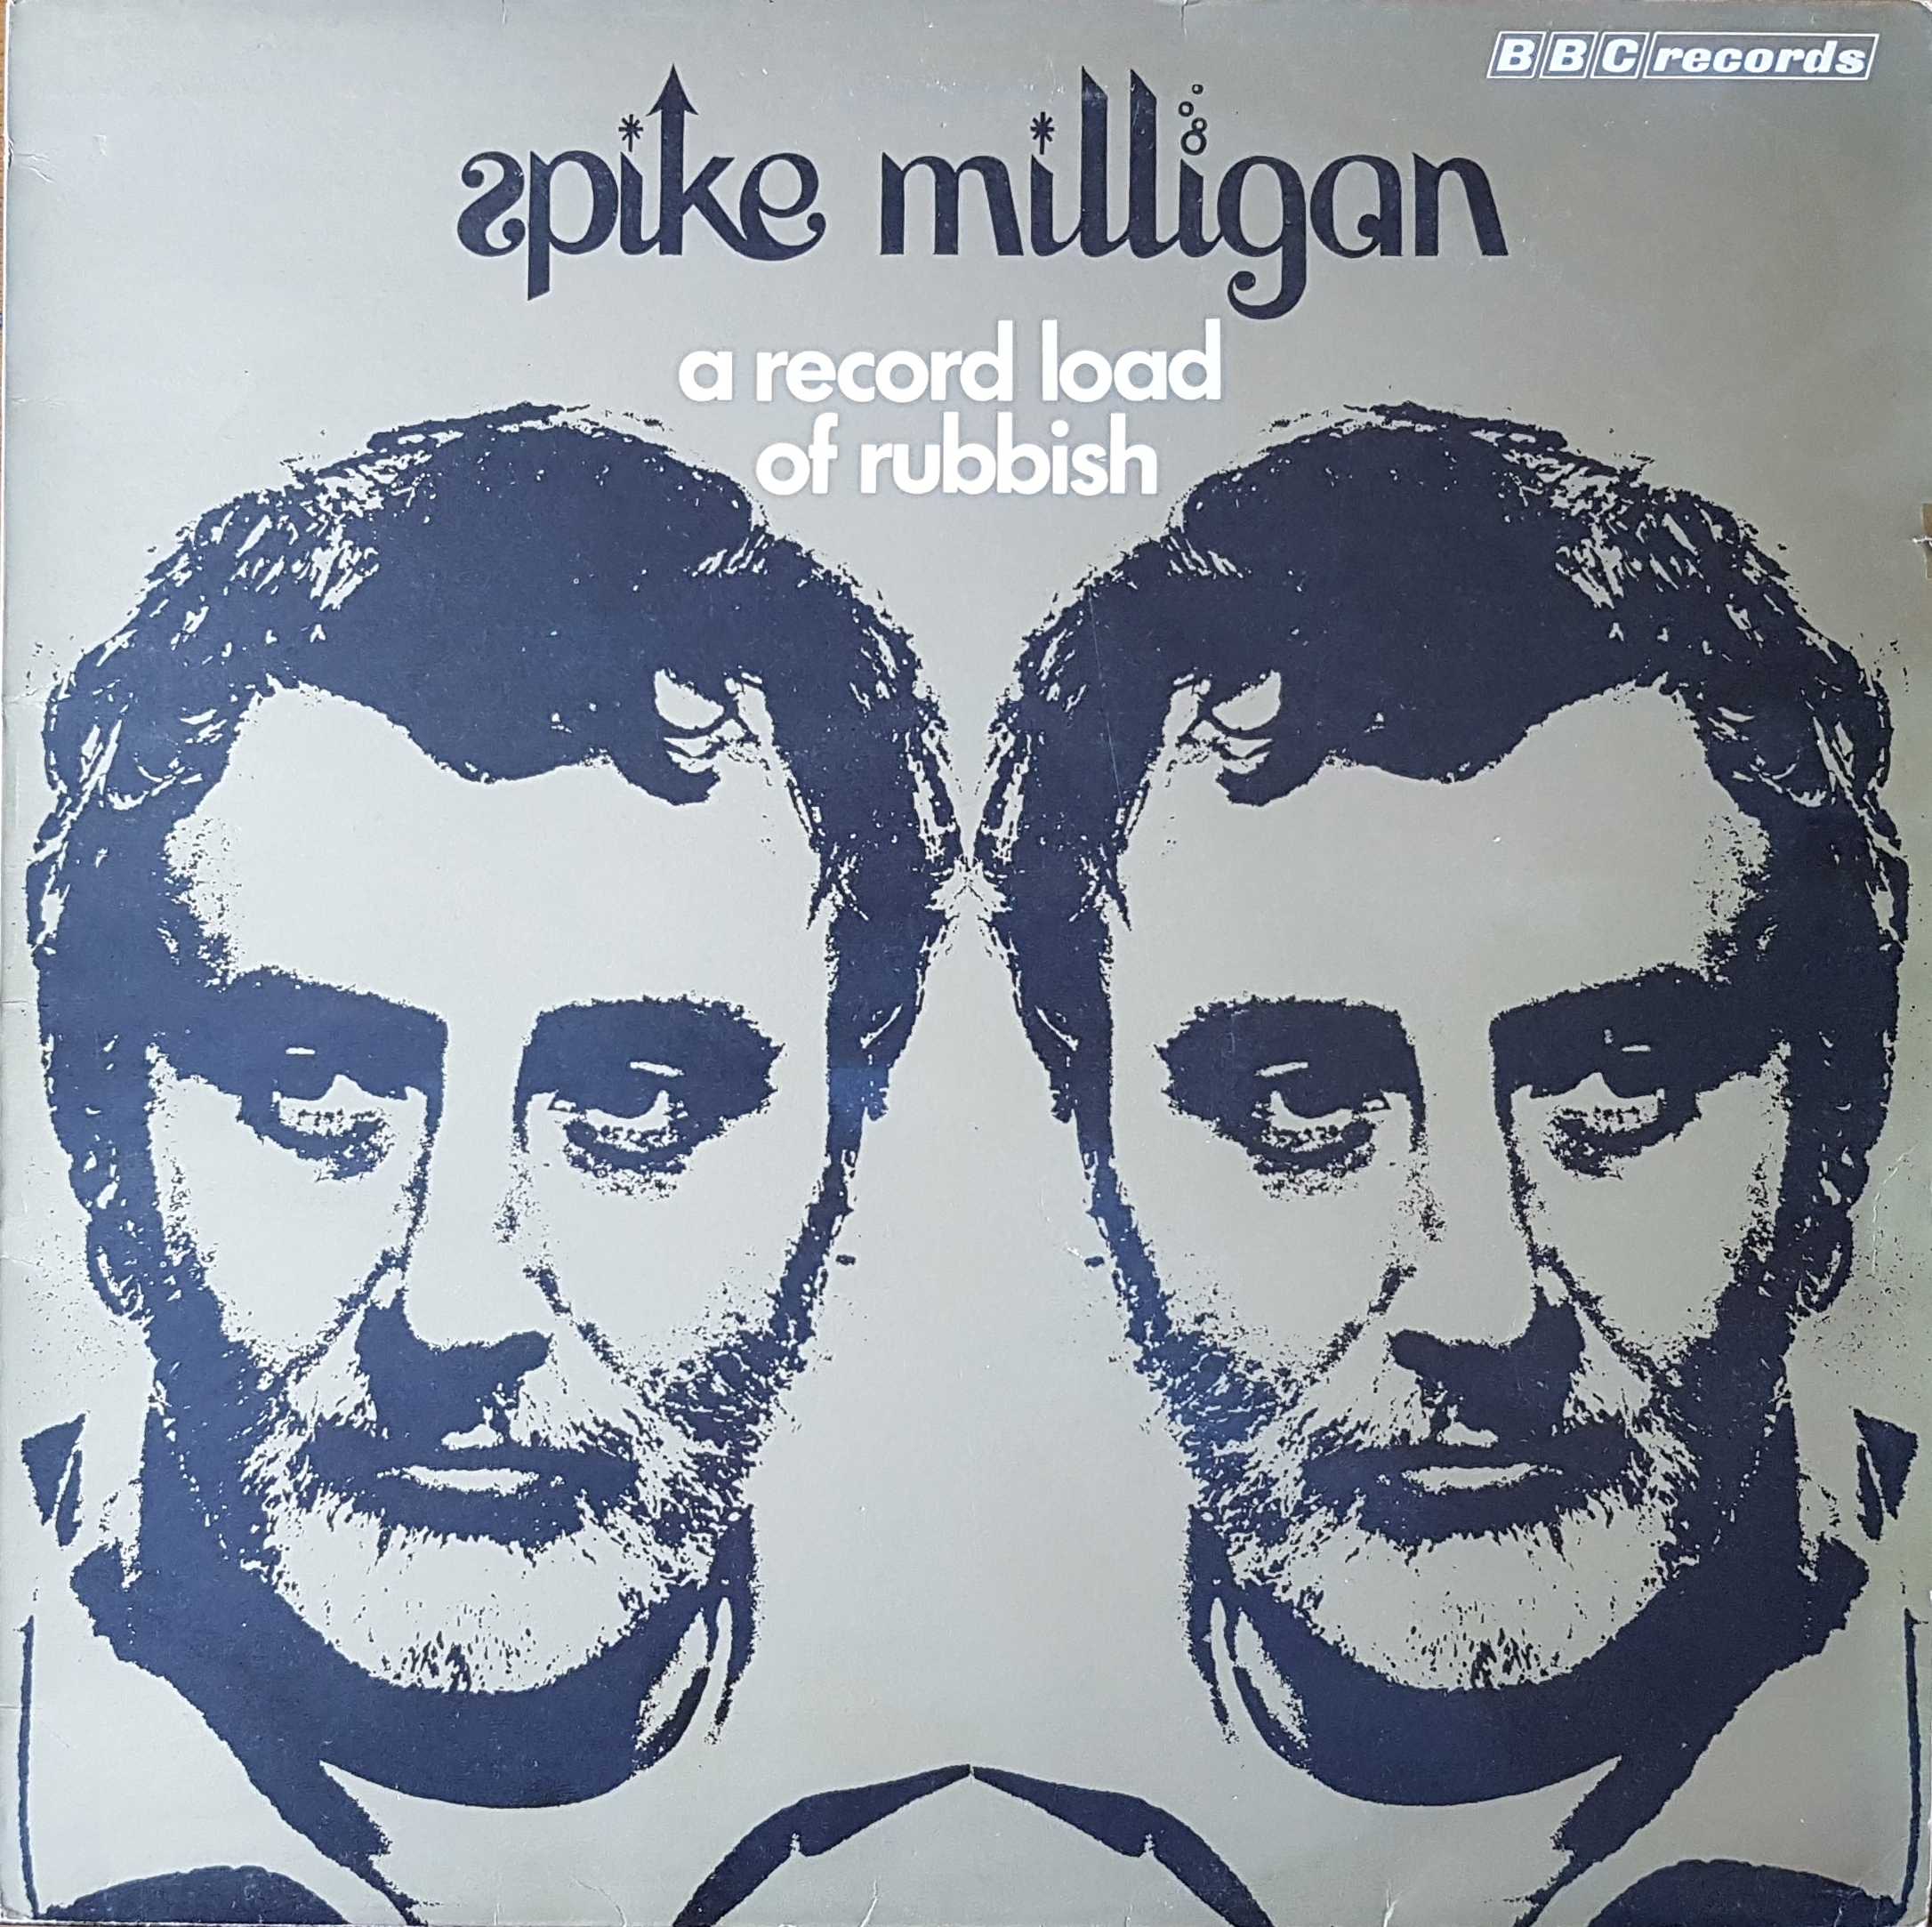 Picture of RED 98 Spike Milligan, a record load of rubbish by artist Spike Milligan from the BBC albums - Records and Tapes library